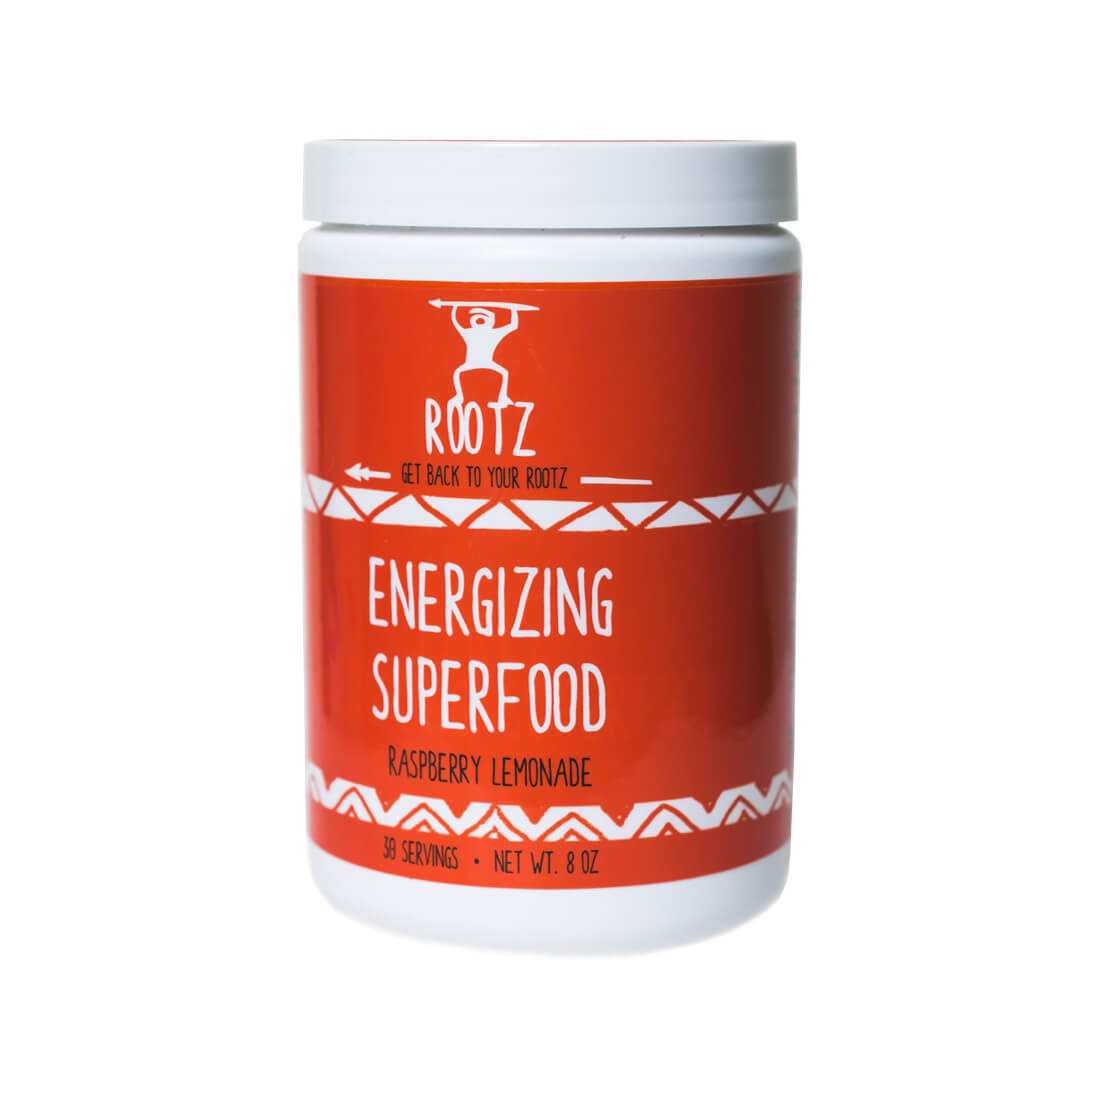 Energizing Superfood x 1 - Special Offer